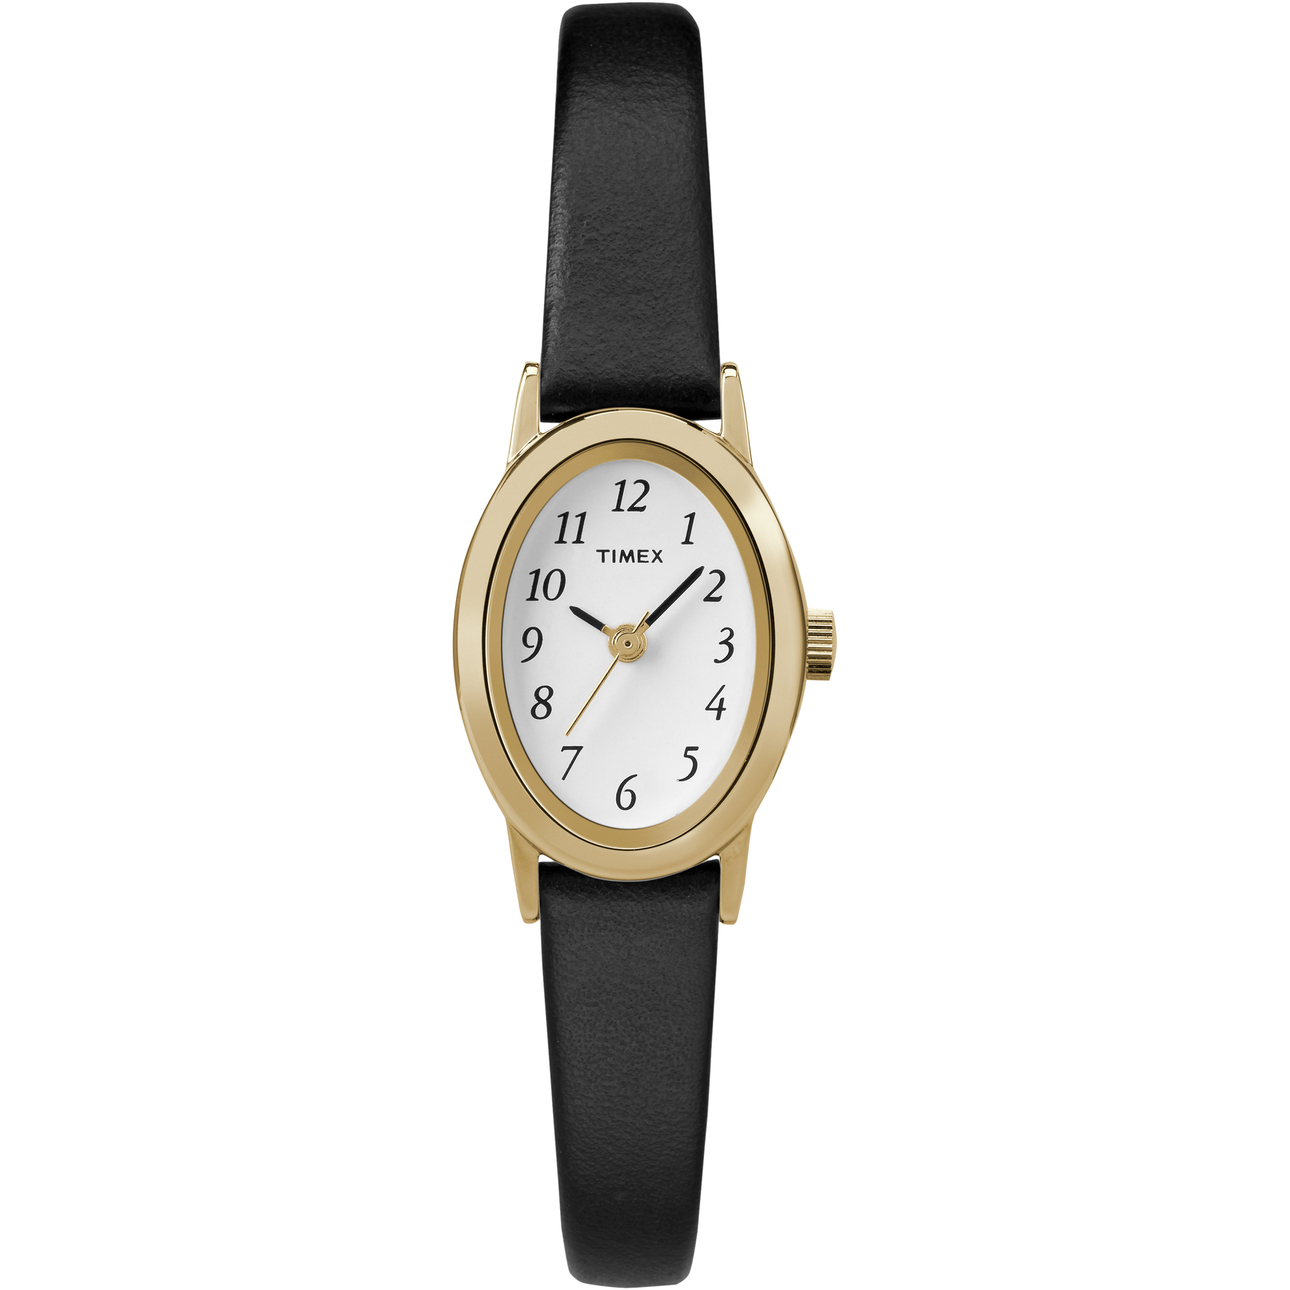 Timex Women's Cavatina Black/Gold-Tone 18mm Classic Watch, Leather Strap - image 1 of 3